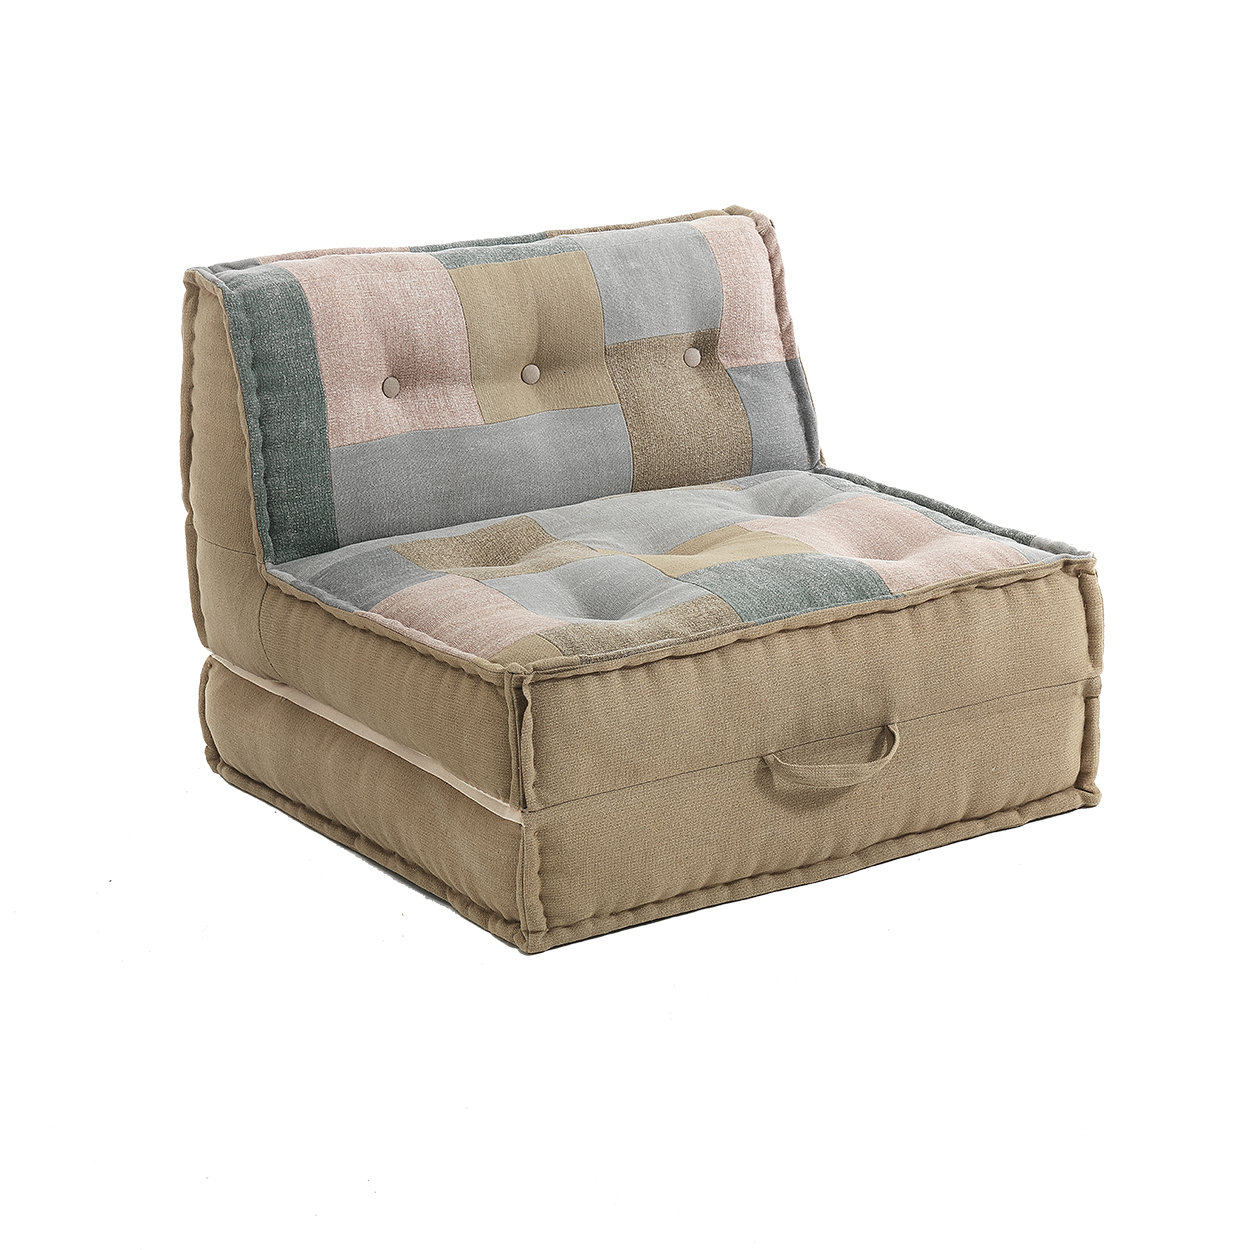 Image of Poltrona-Chaise Longue SOFT PATCHWORK